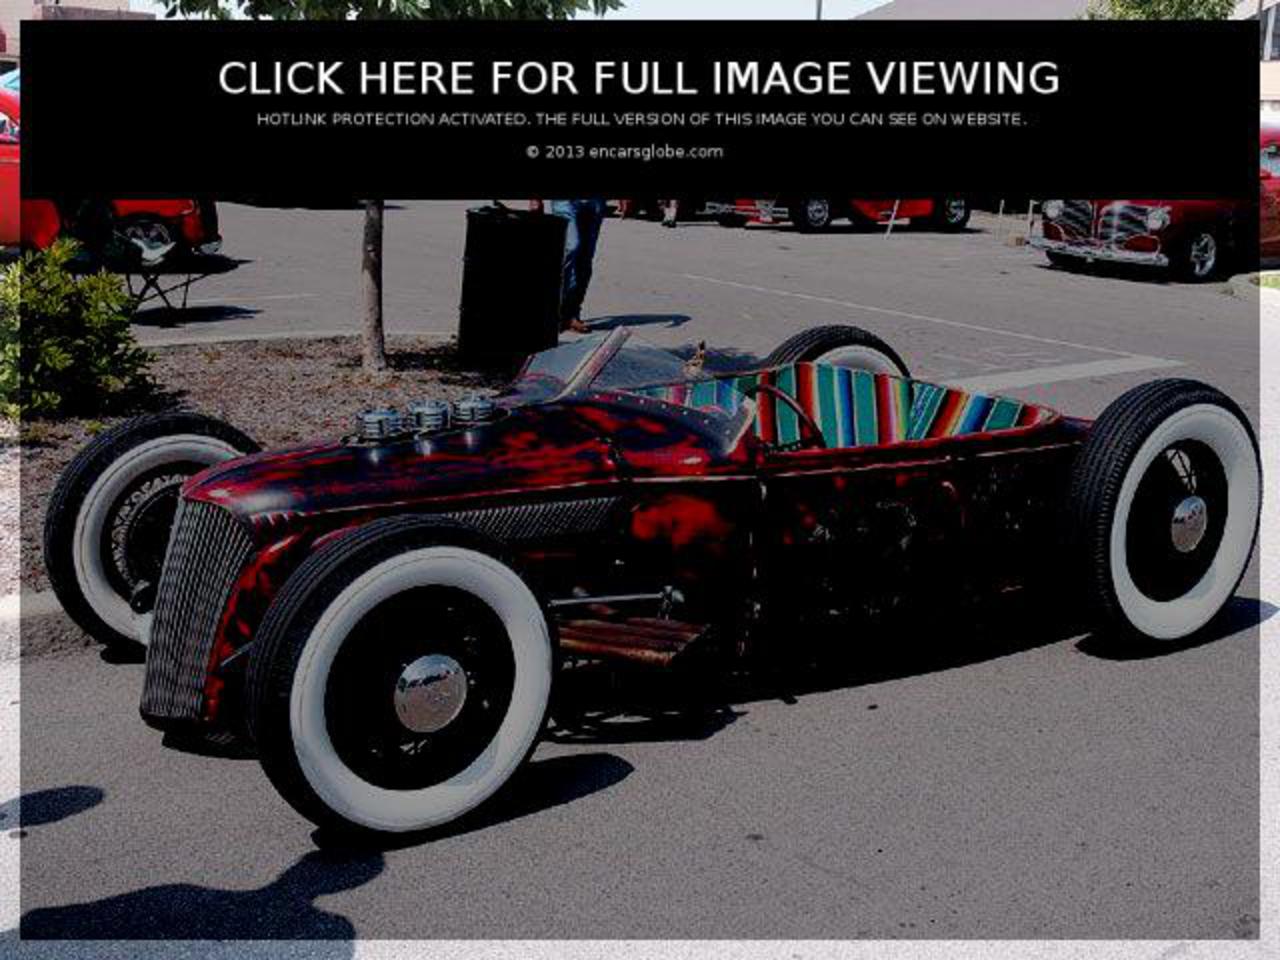 Homebuilt VW 1300 Buggy Photo Gallery: Photo #11 out of 8, Image ...